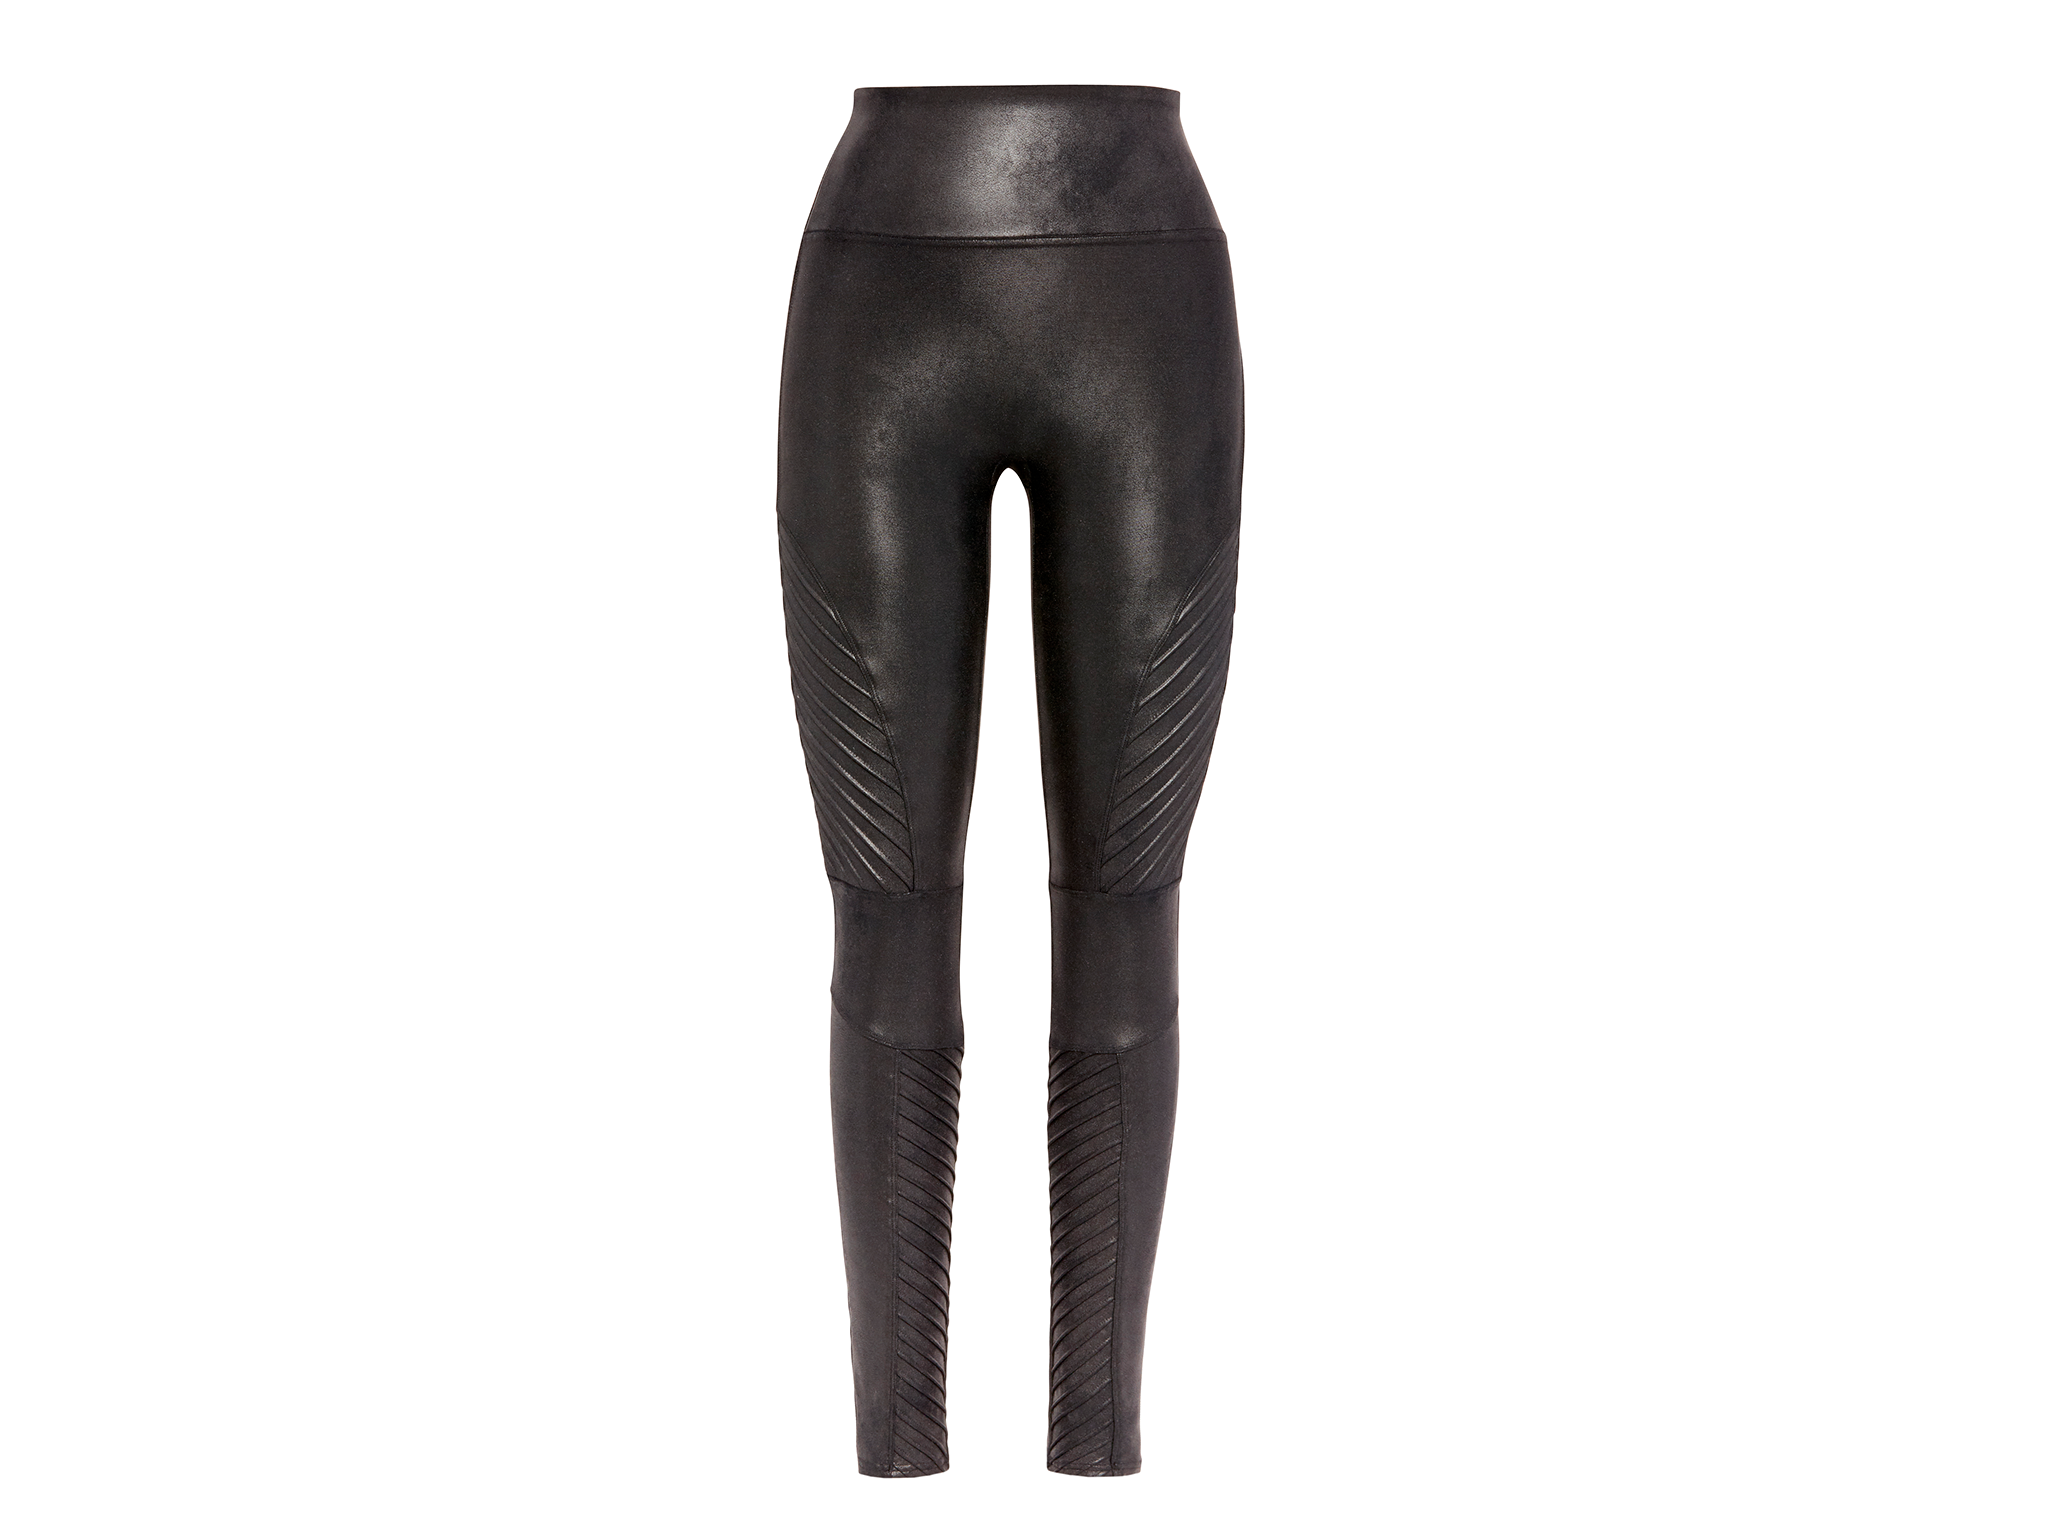  Customer reviews: SPANX Faux Leather Leggings for Women Tummy  Control Black MD - Regular 30